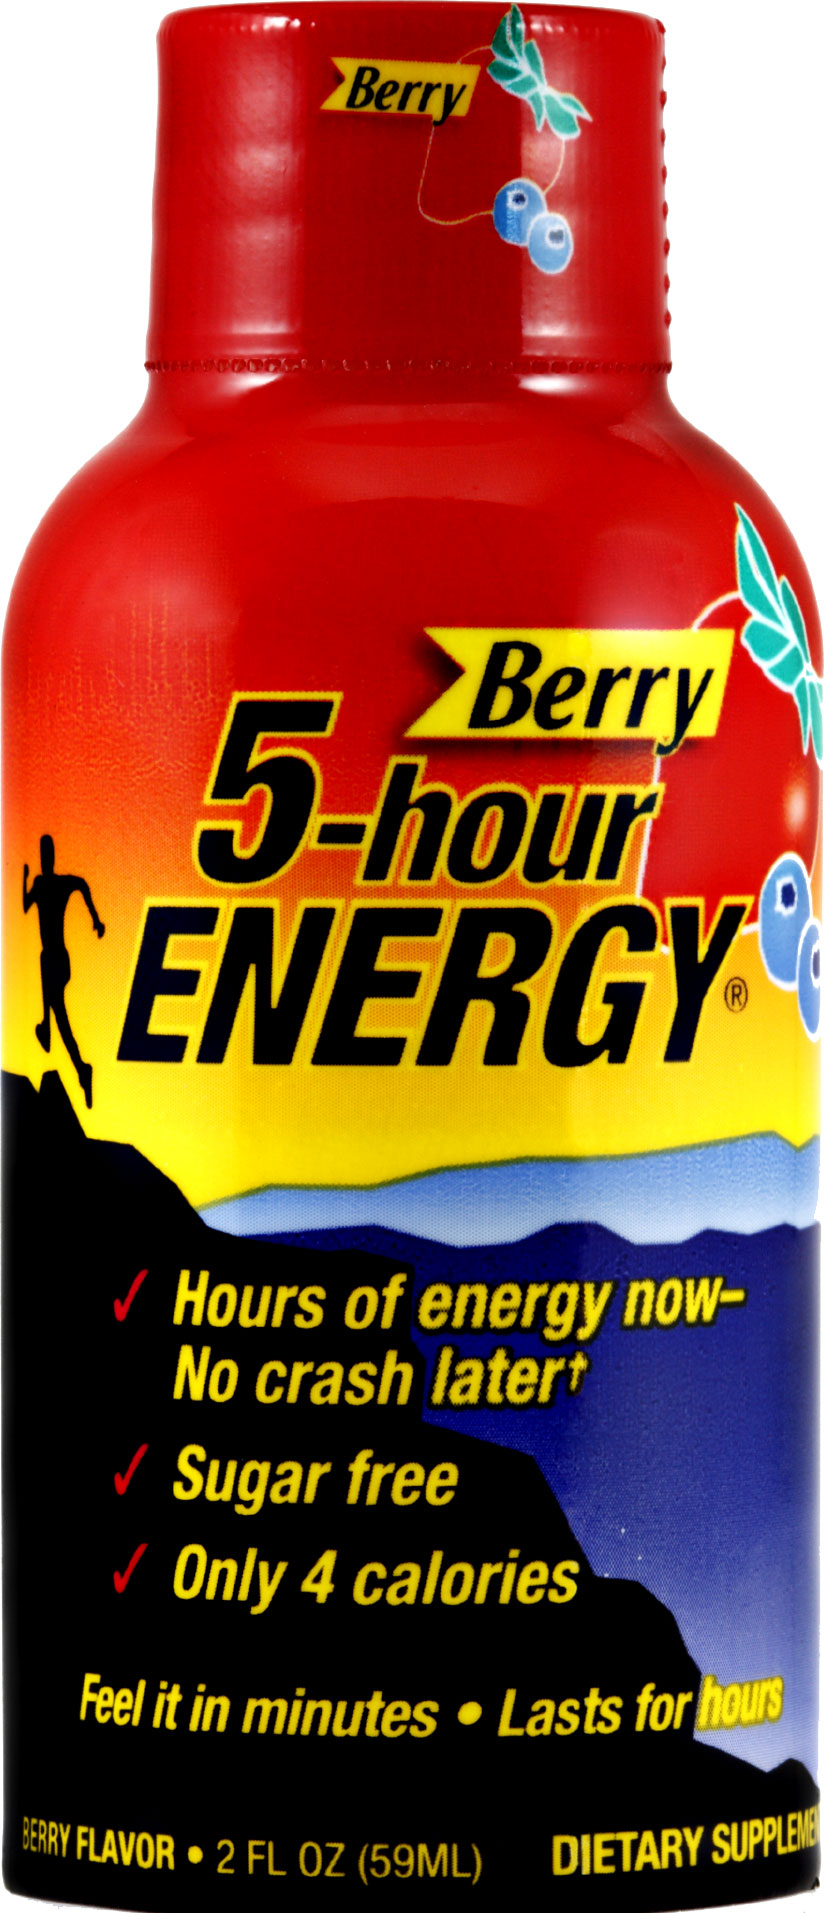 whats in 5 hour energy